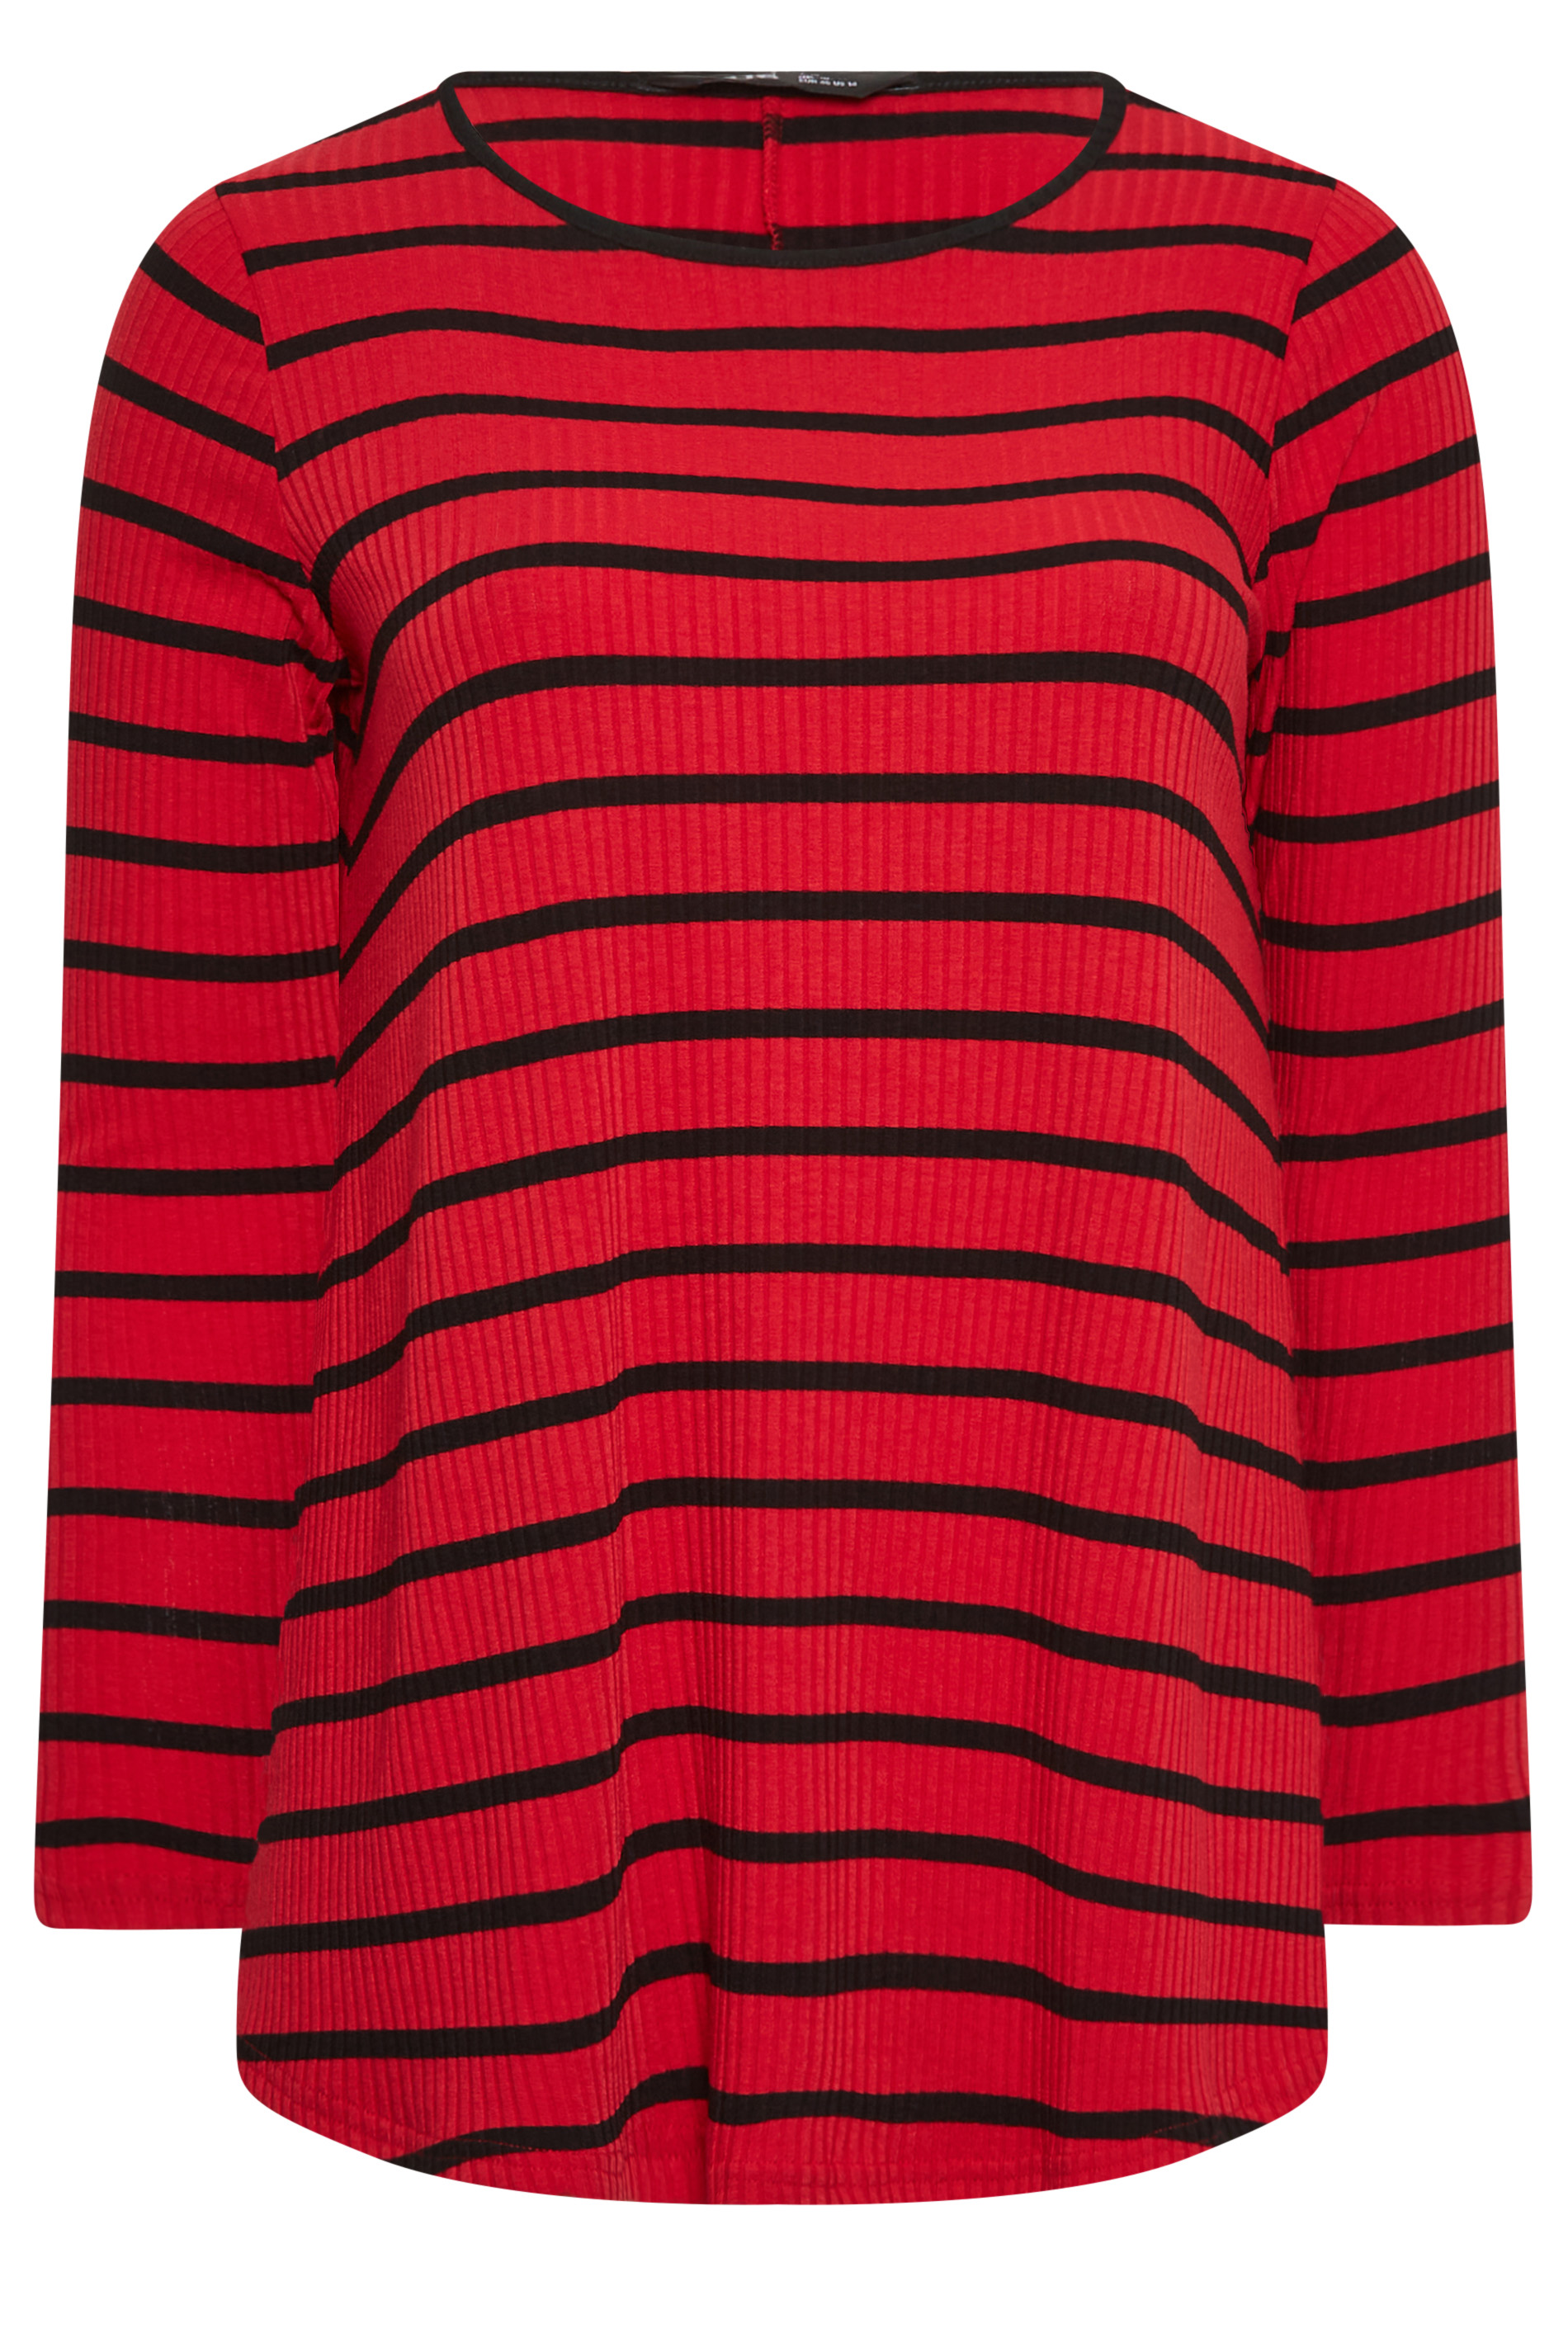 YOURS Stripe Top Clothing Size | Ribbed Plus Swing Red Yours